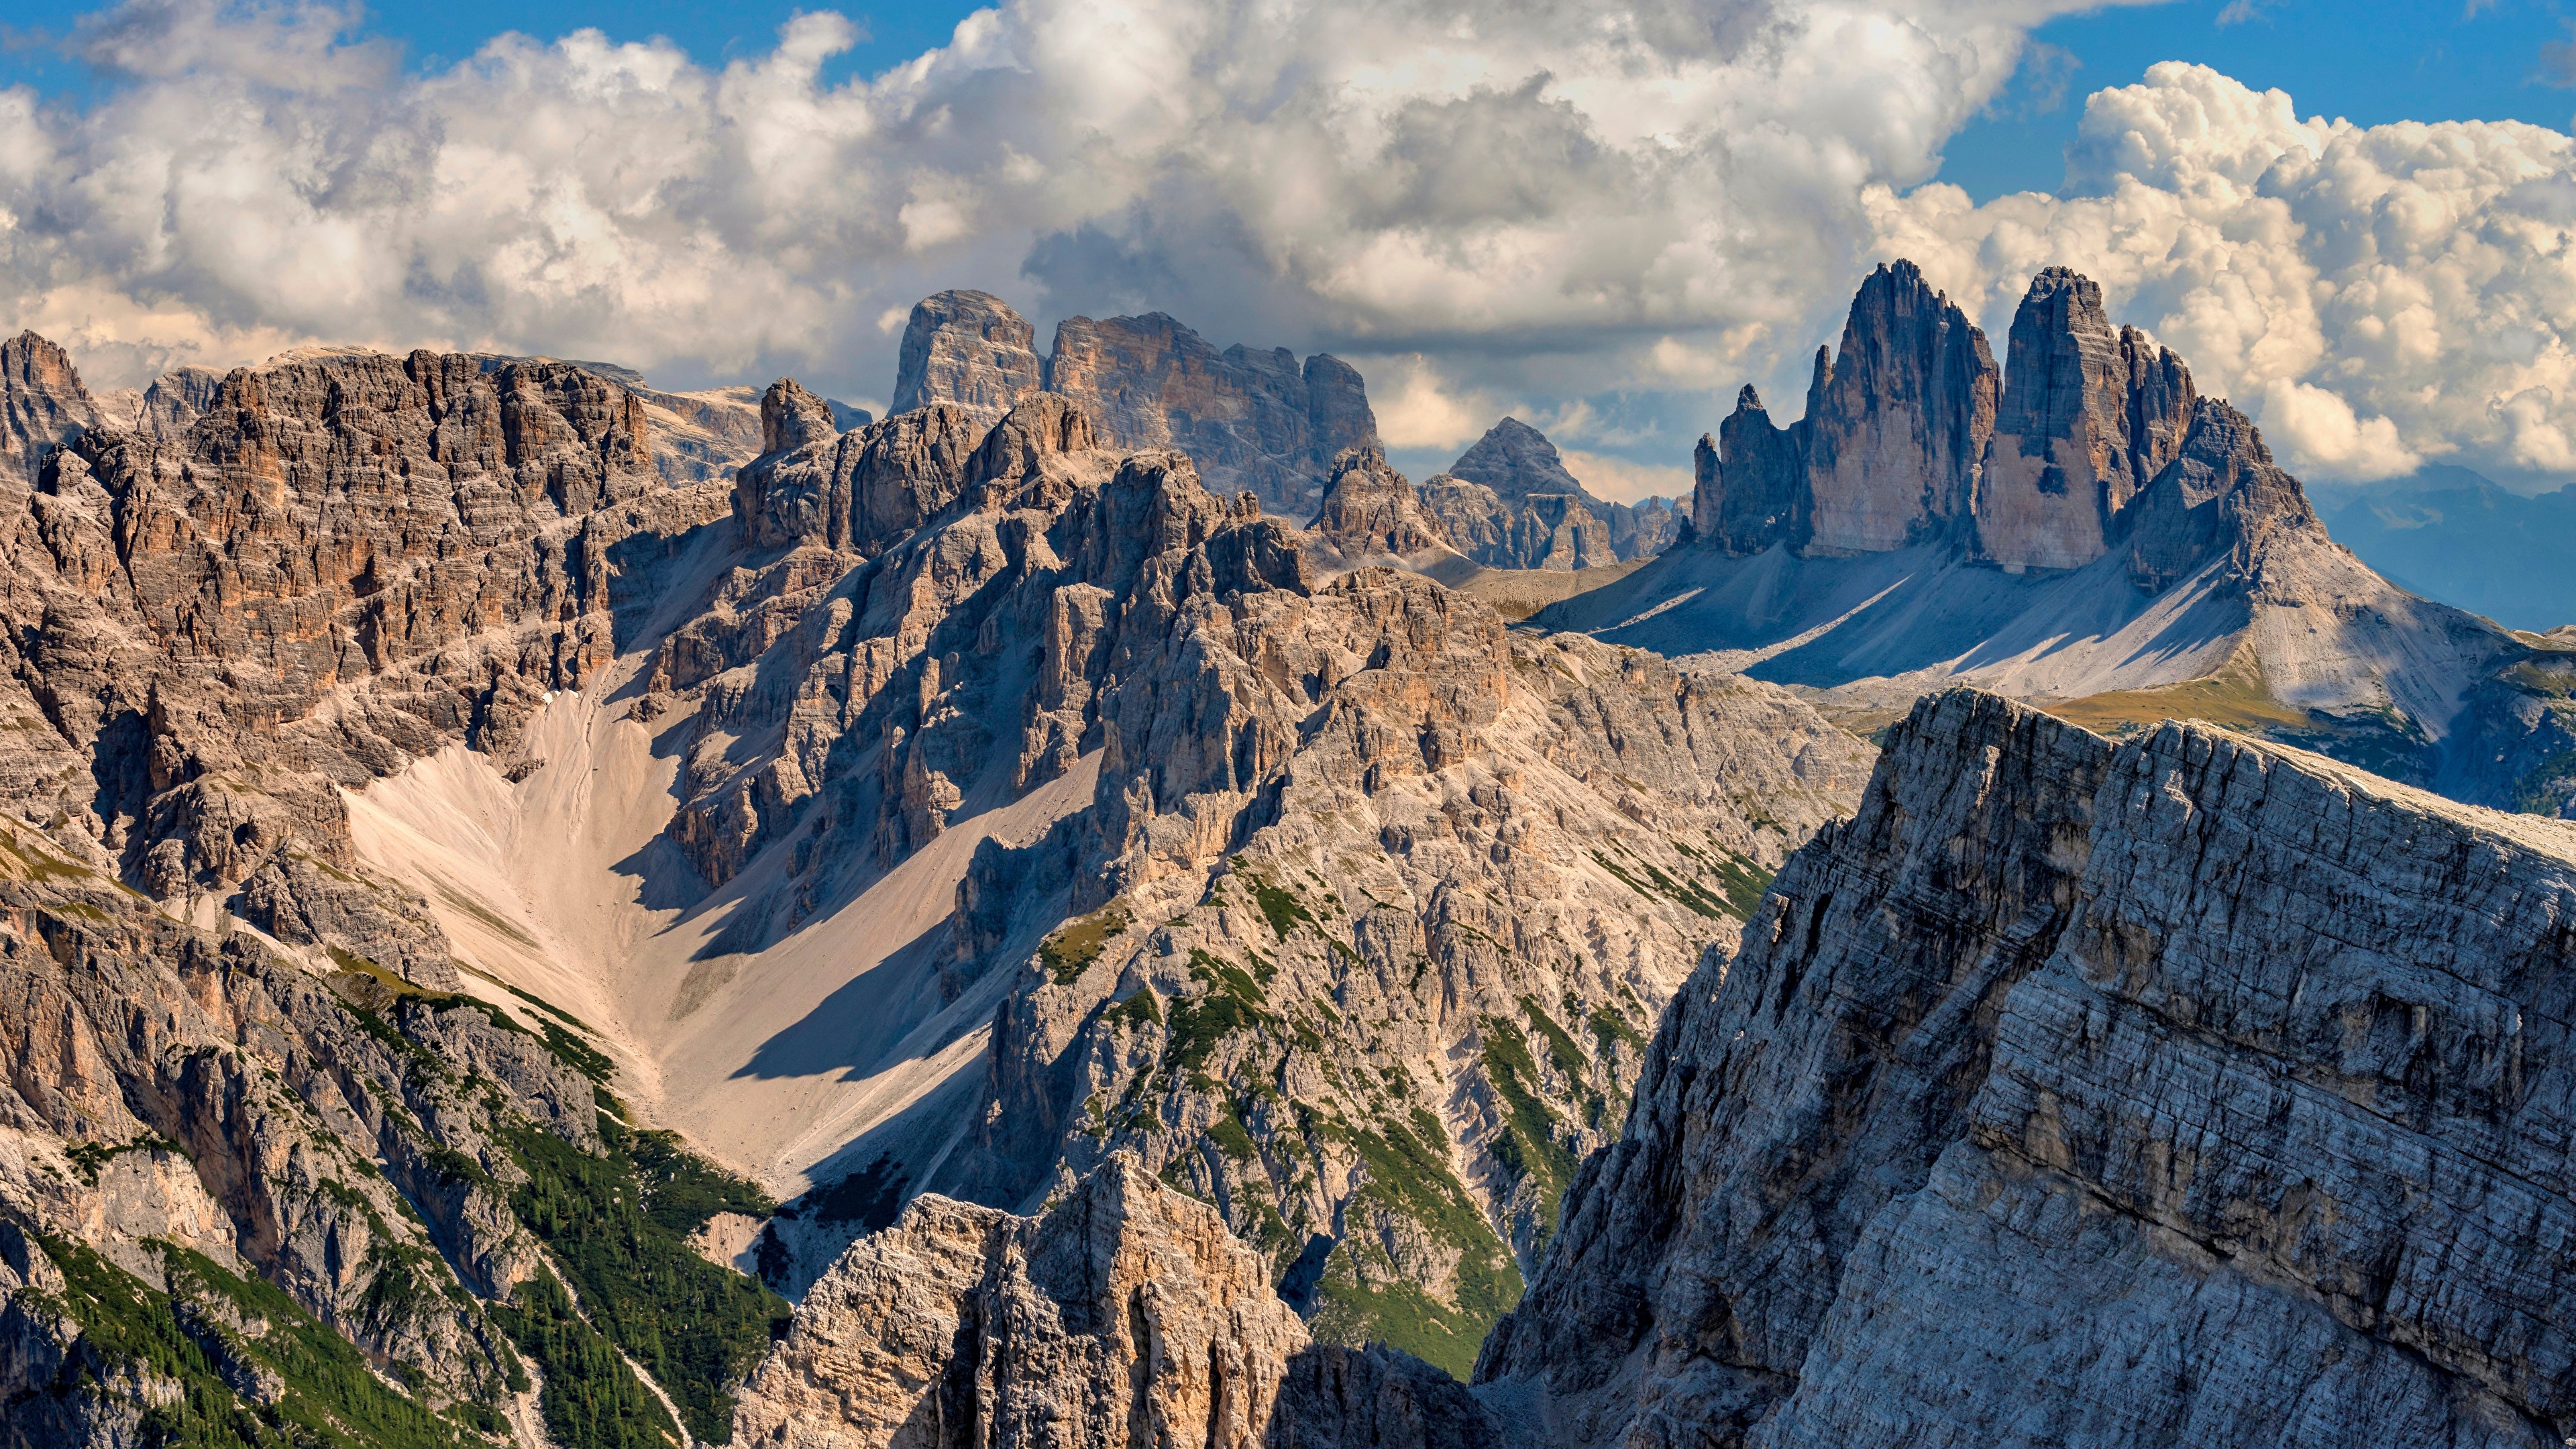 Italy Dolomites Alps Nature Sky Mountains Clouds Photography 3840x2160